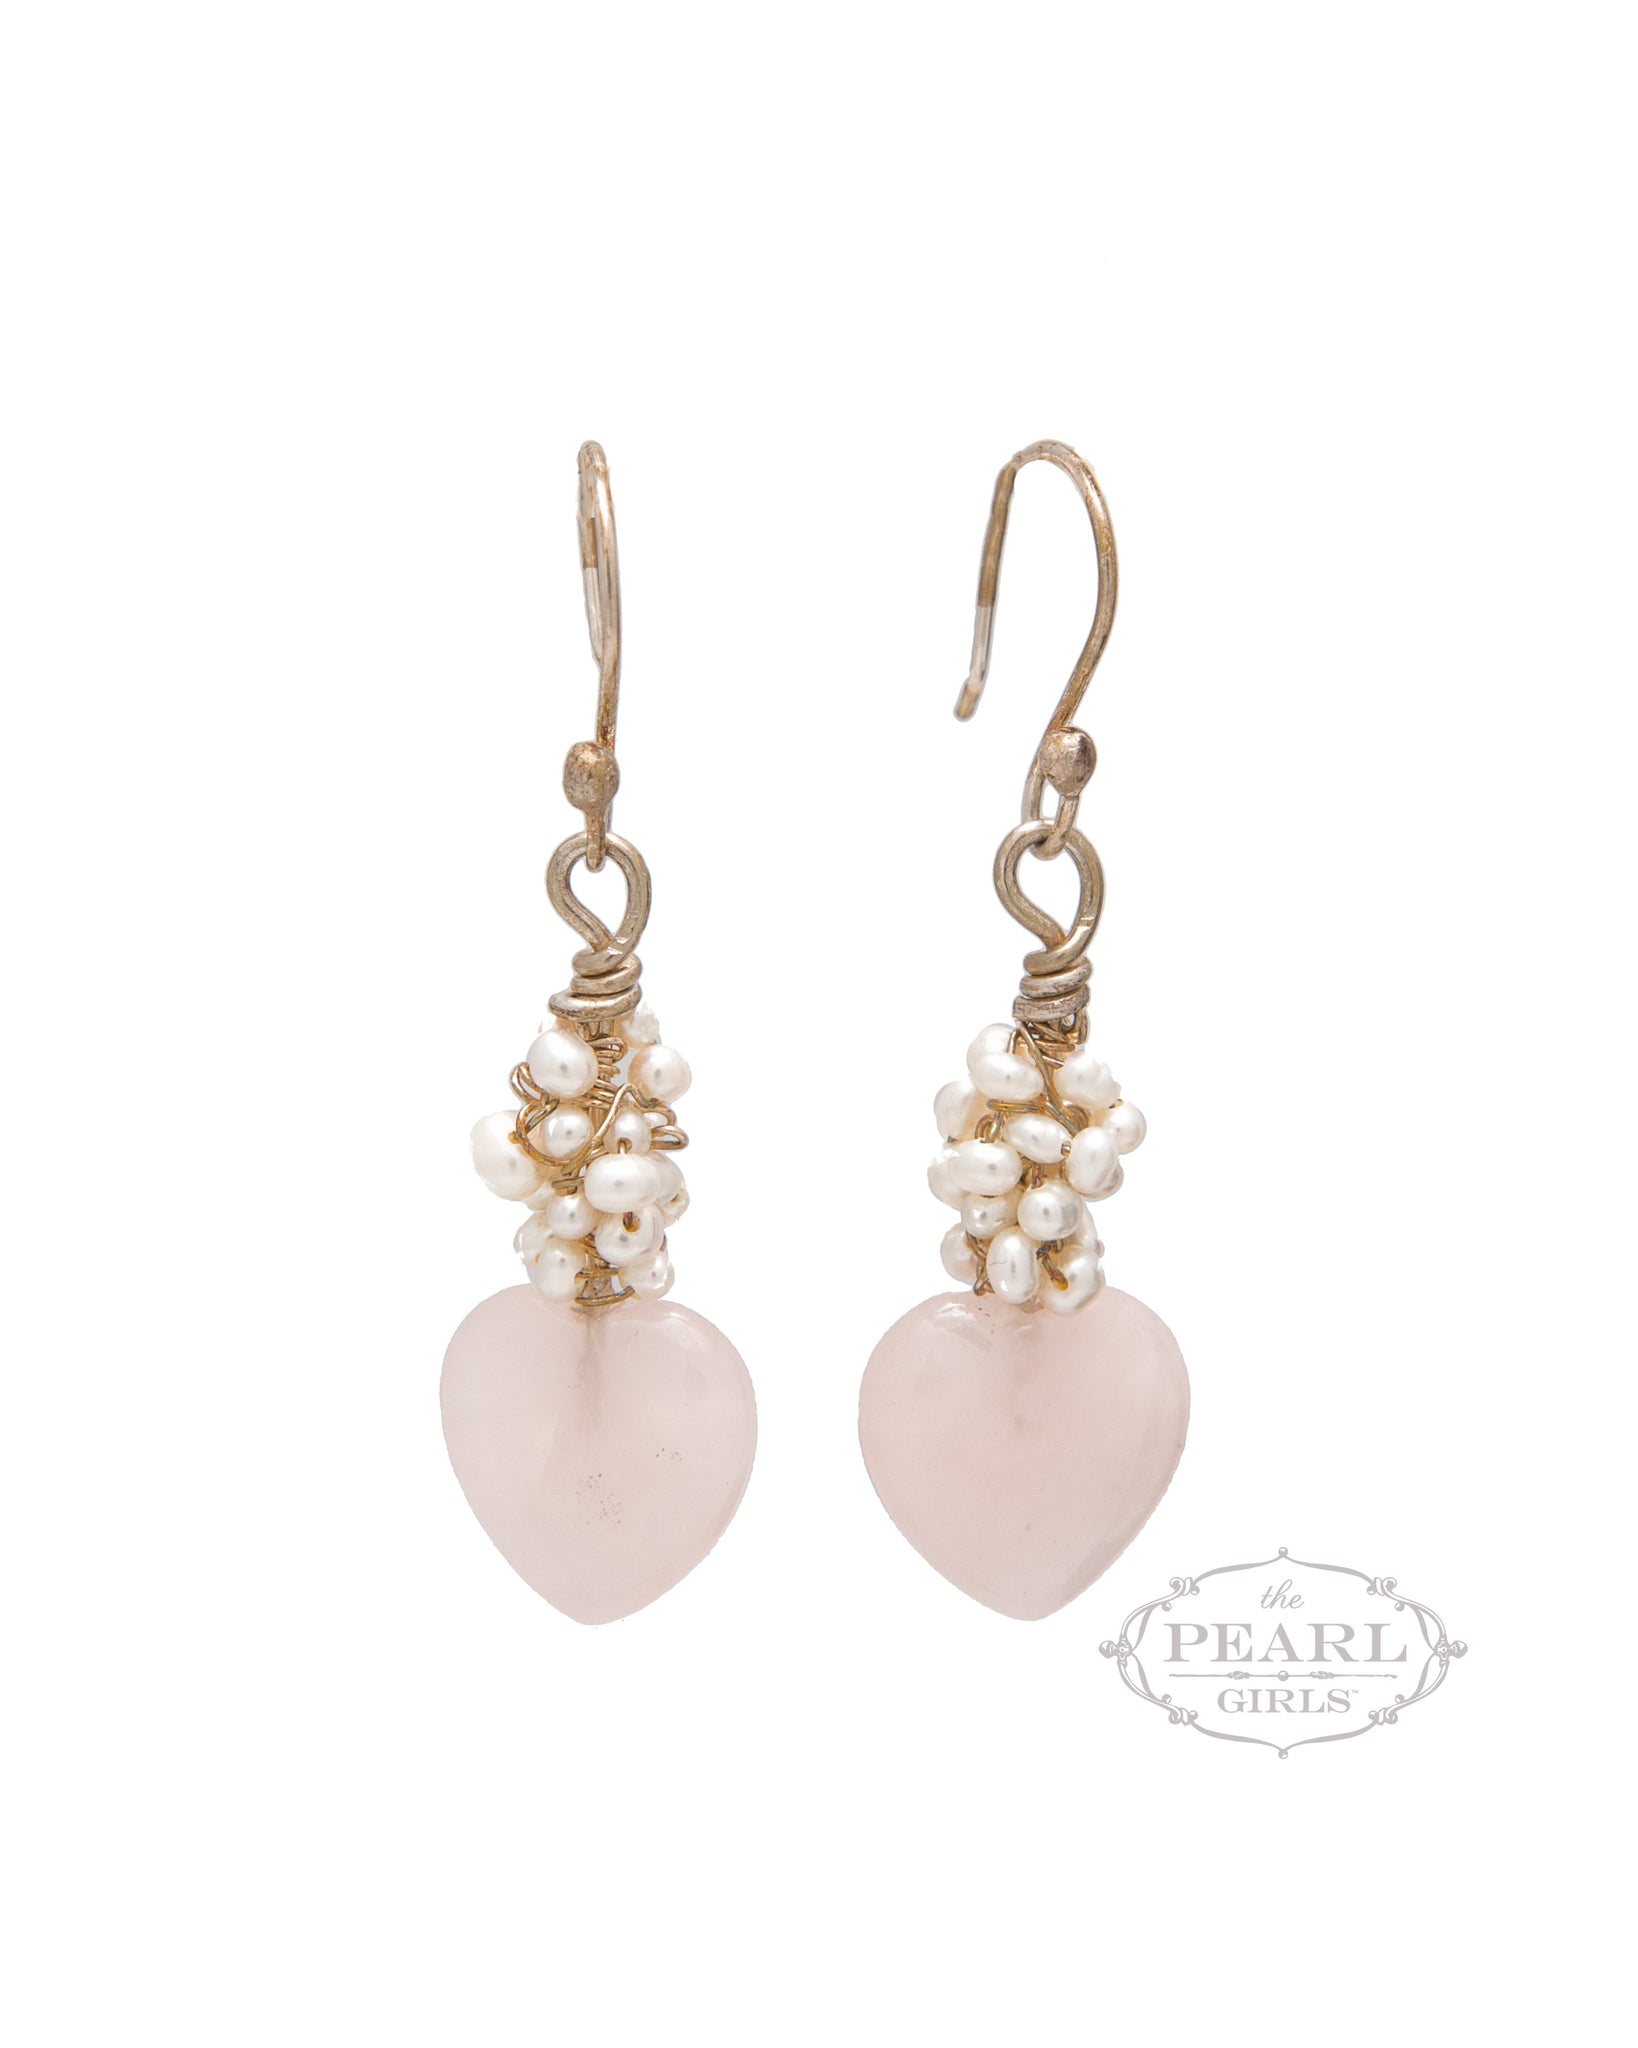 Hearts and Pearls Earrings by Sylvia Dawe